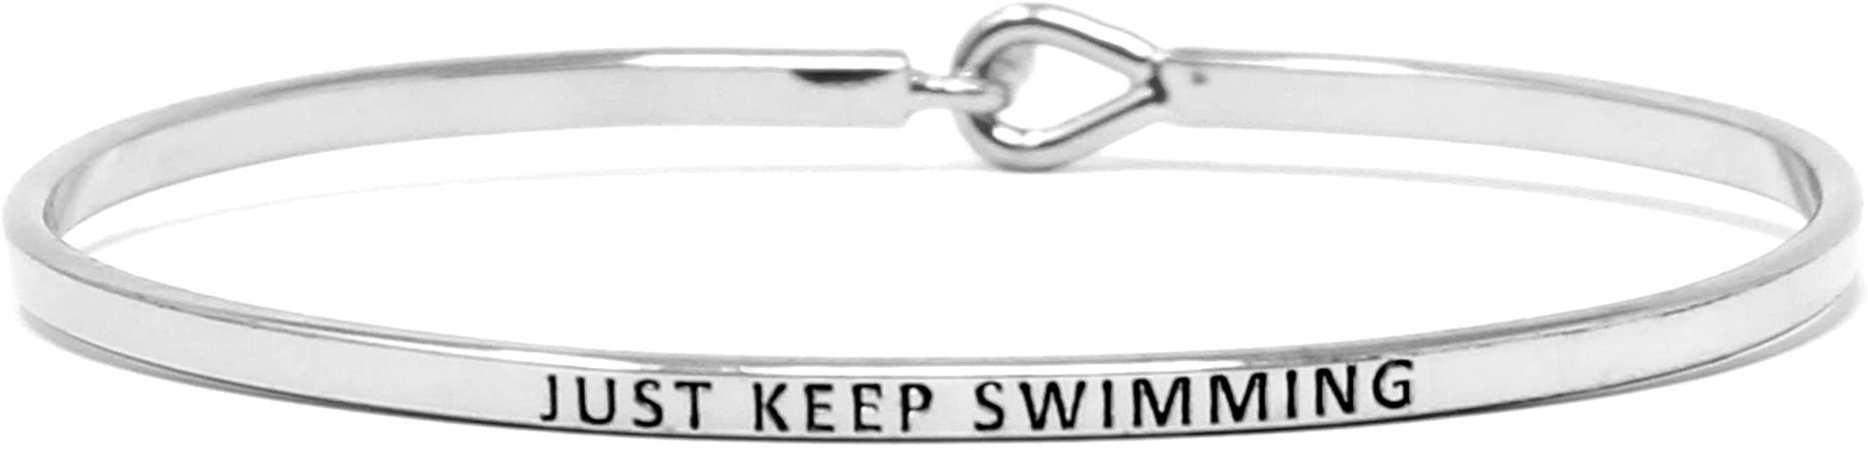 Amazon.com: Me Plus Inspirational Bracelets for Personalized Gifts Positive Message Engraved Thin Bangle Hook Bracelet (JUST Keep Swimming - Silver): Clothing, Shoes & Jewelry